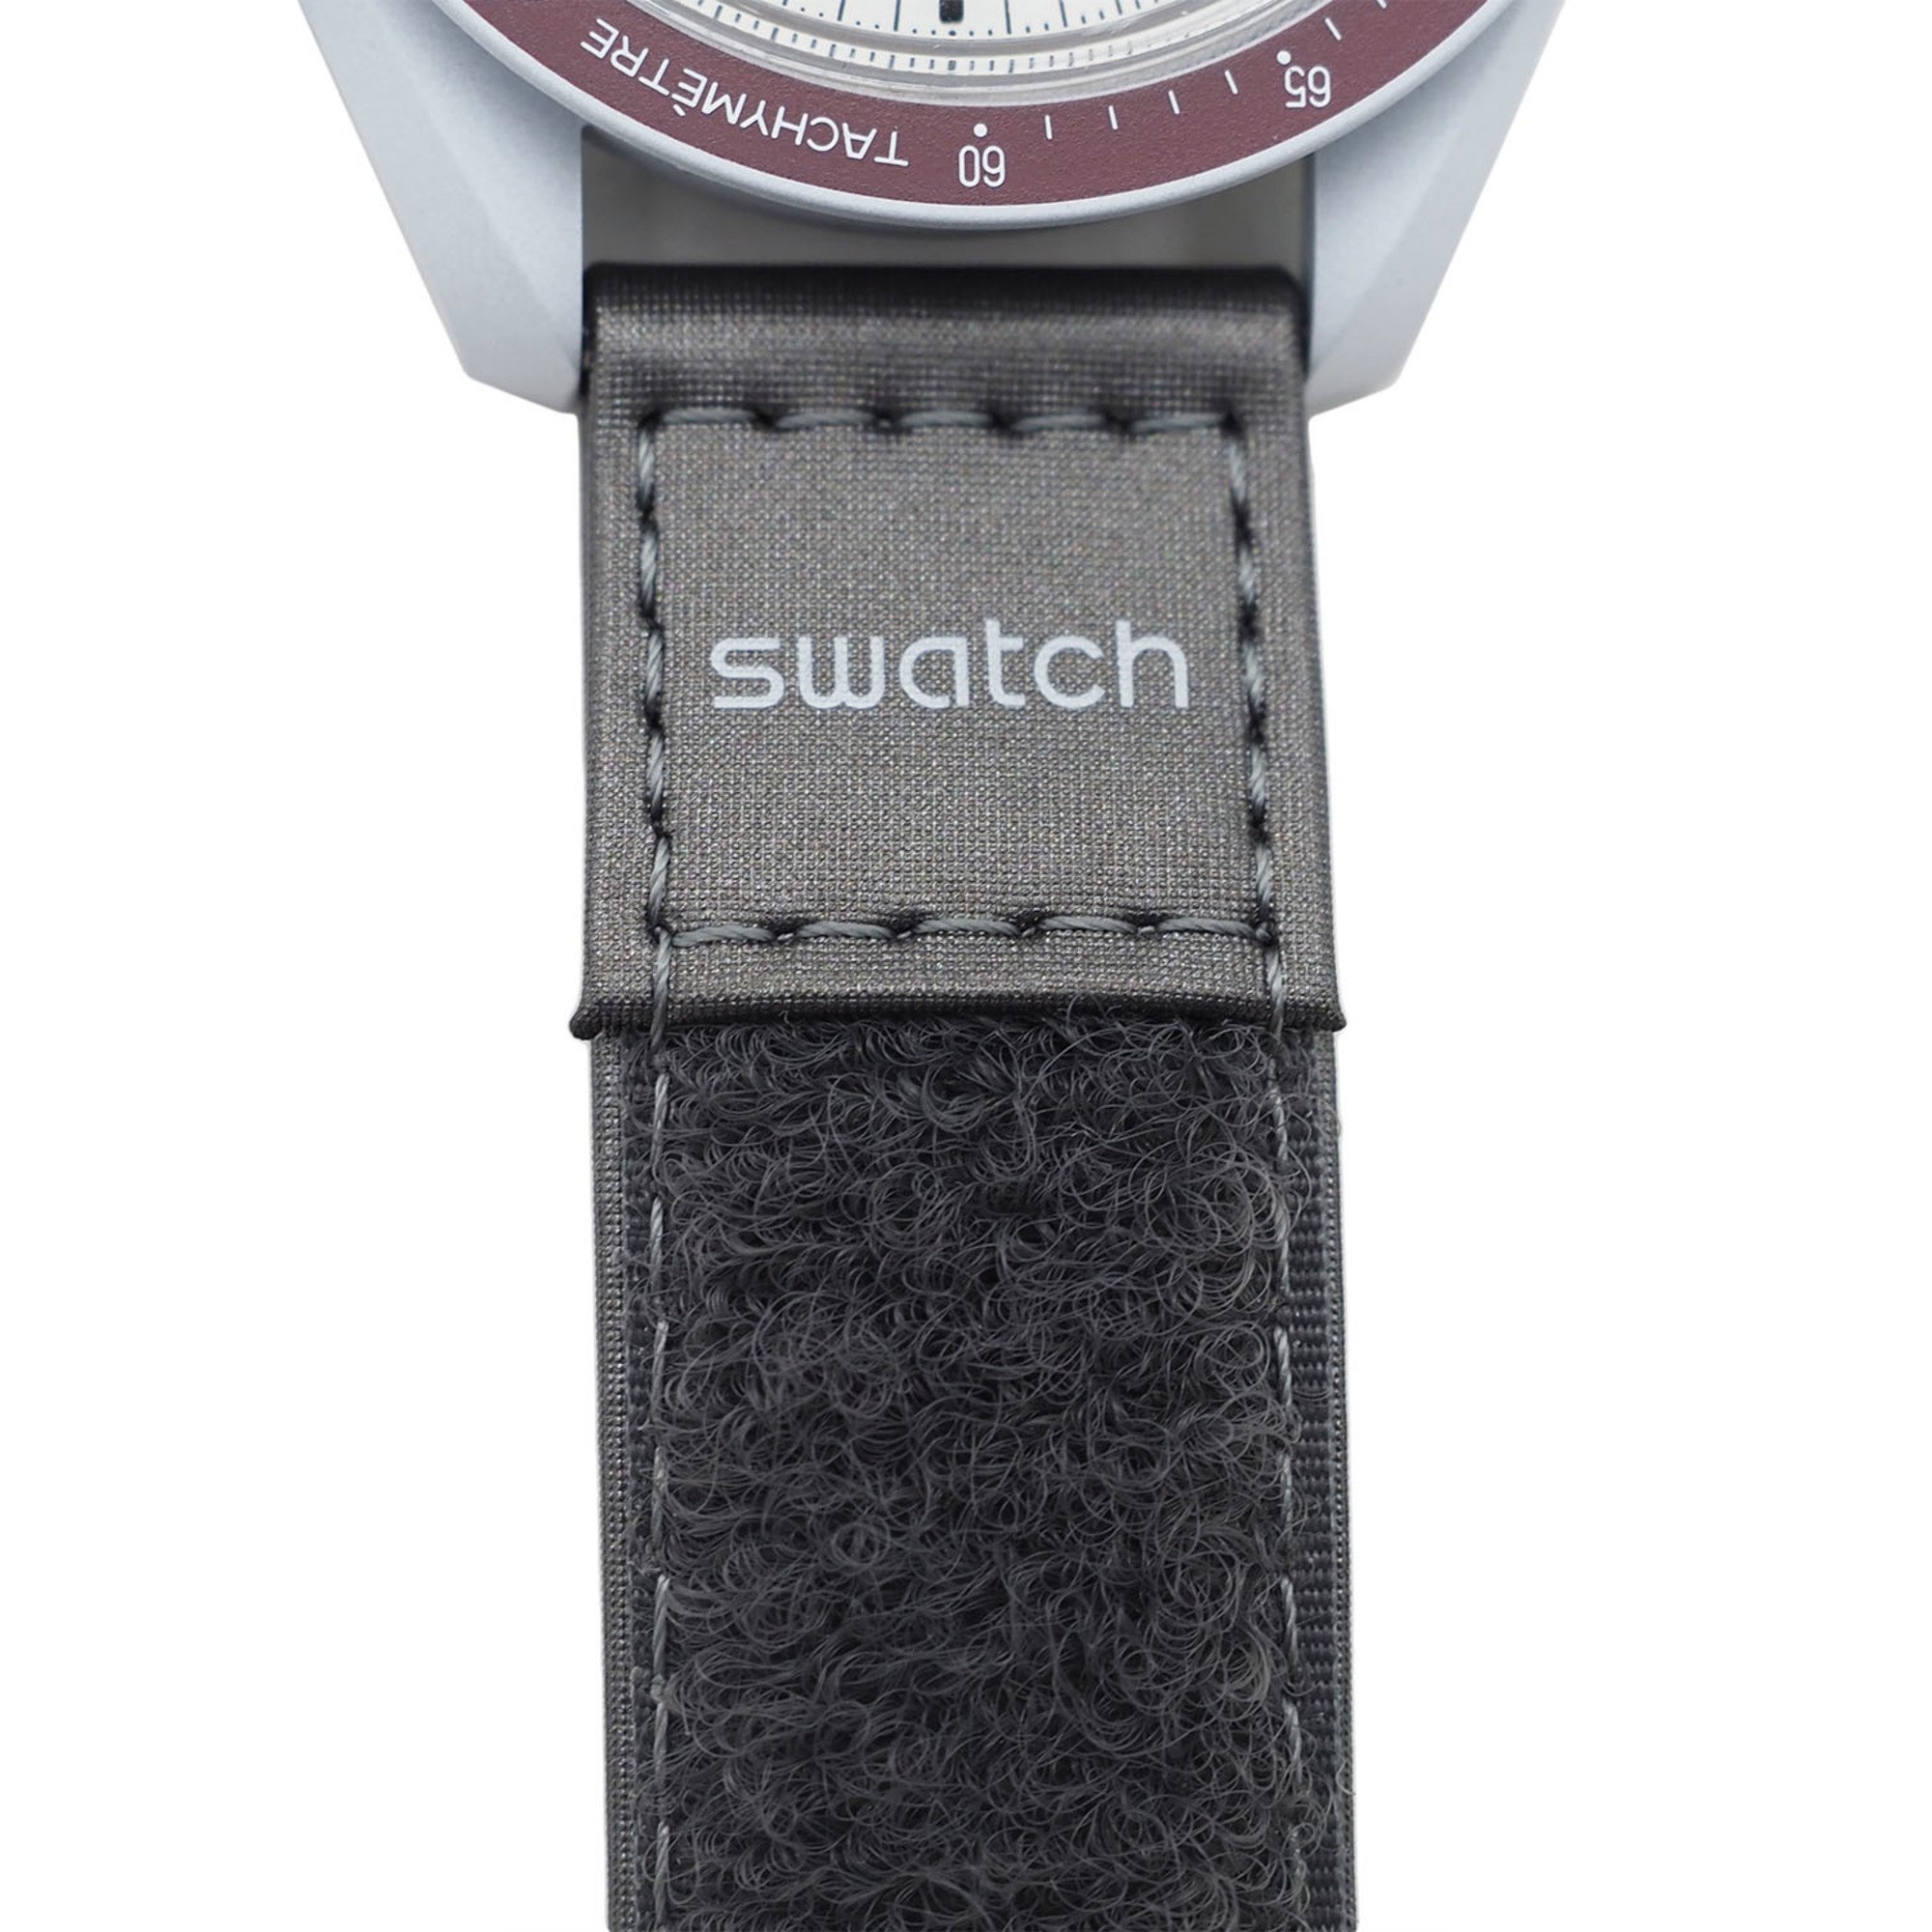 OMEGAxSWATCH MoonSwatch Mission to Pluto Burgundy Watch SO33M101 Men's